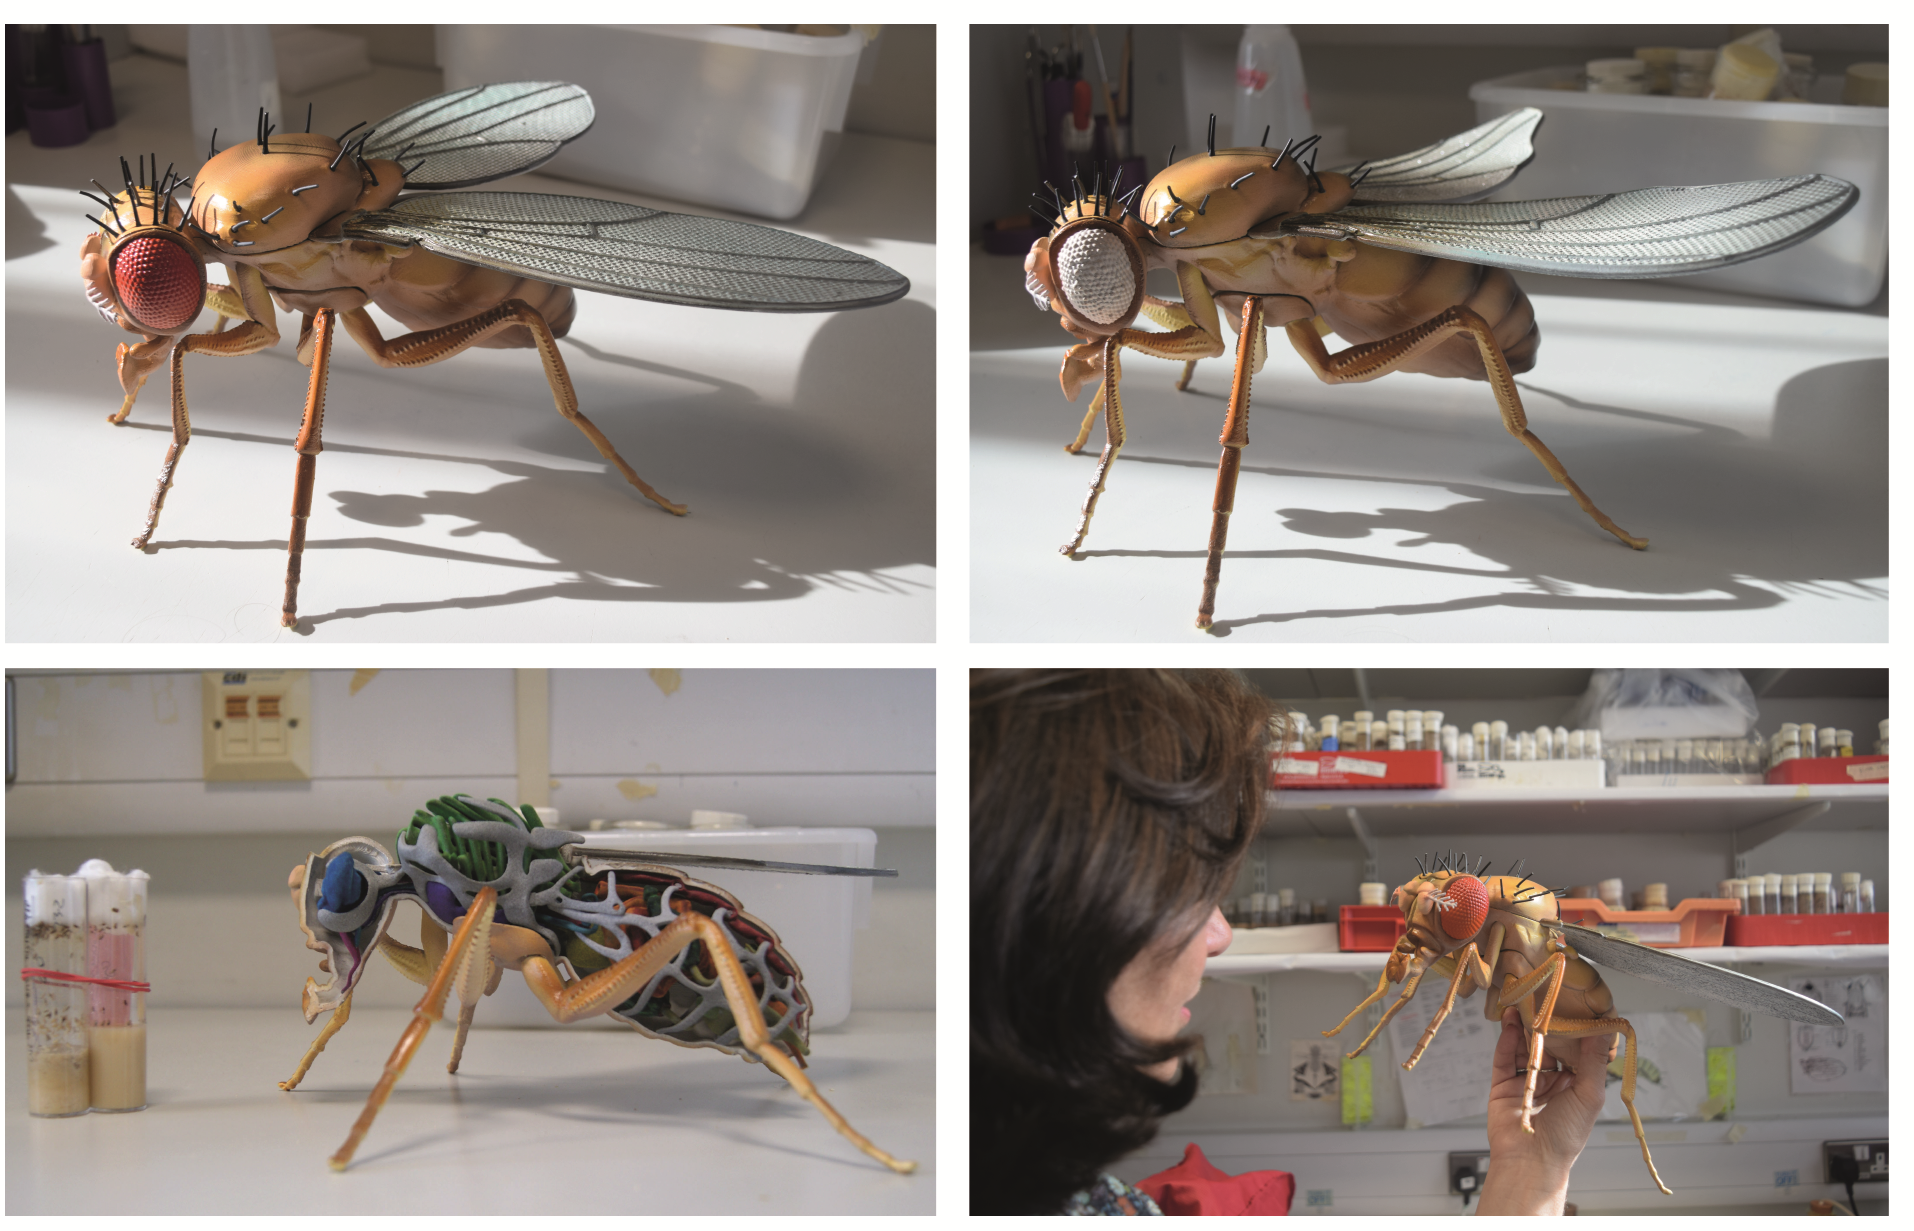 The 3D Printed Fruit fly - physical copies and STL files for printing